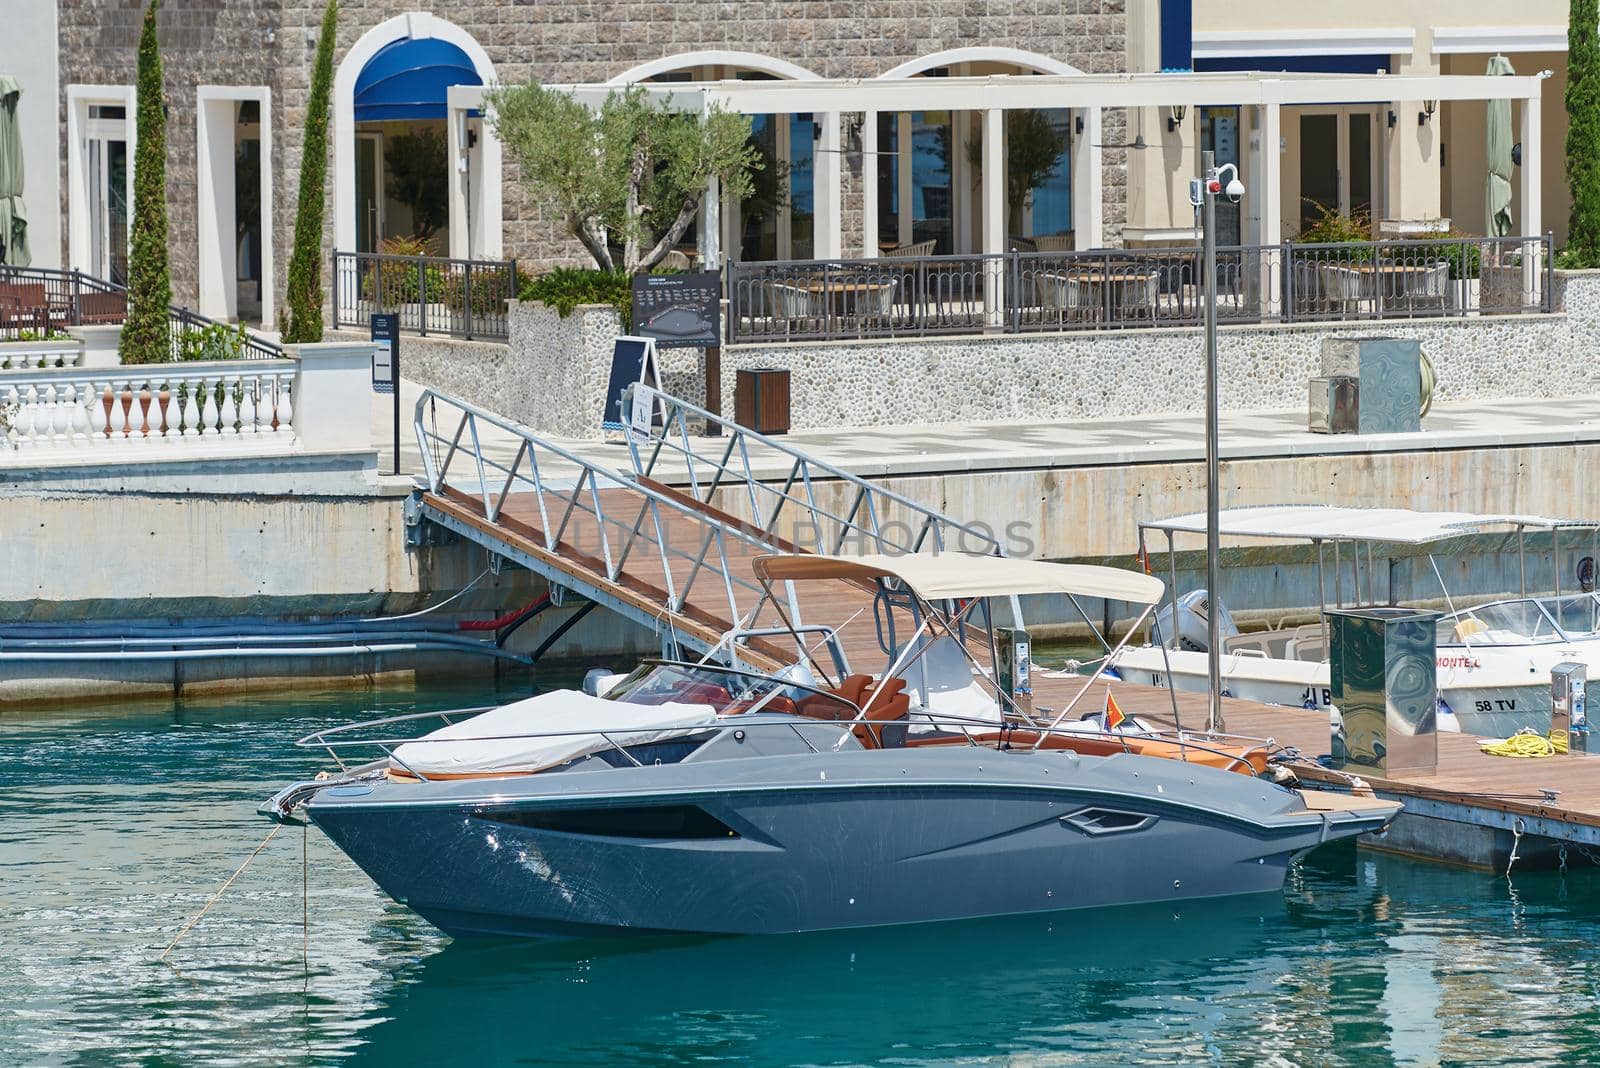 Small yacht of gray color moored at dock.